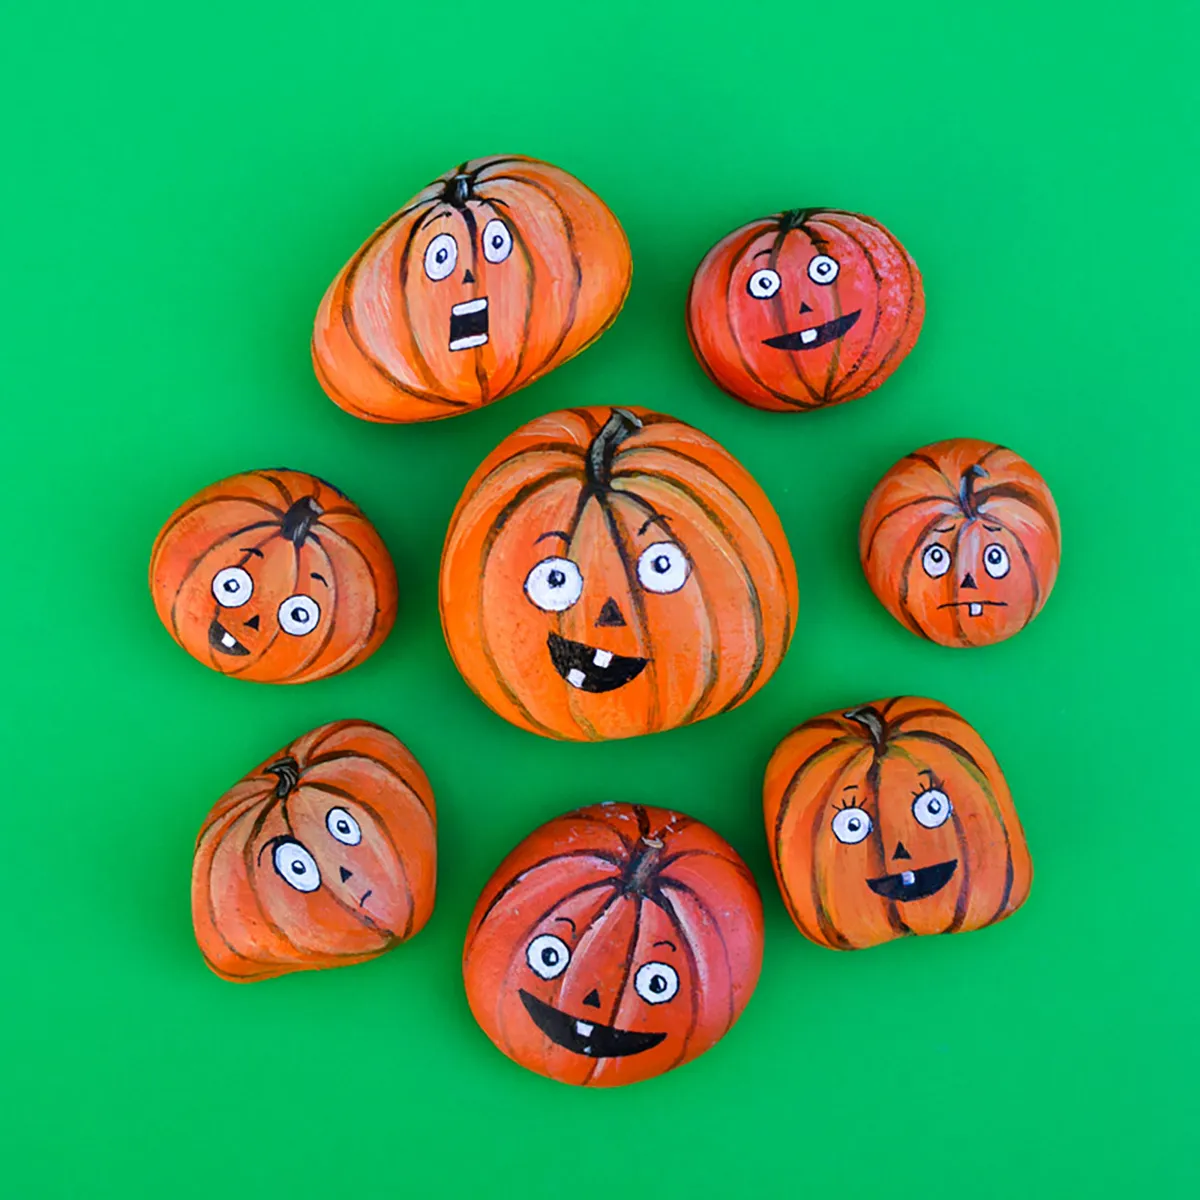 Halloween rock painting ideas – pumpkins from Adventure In A Box